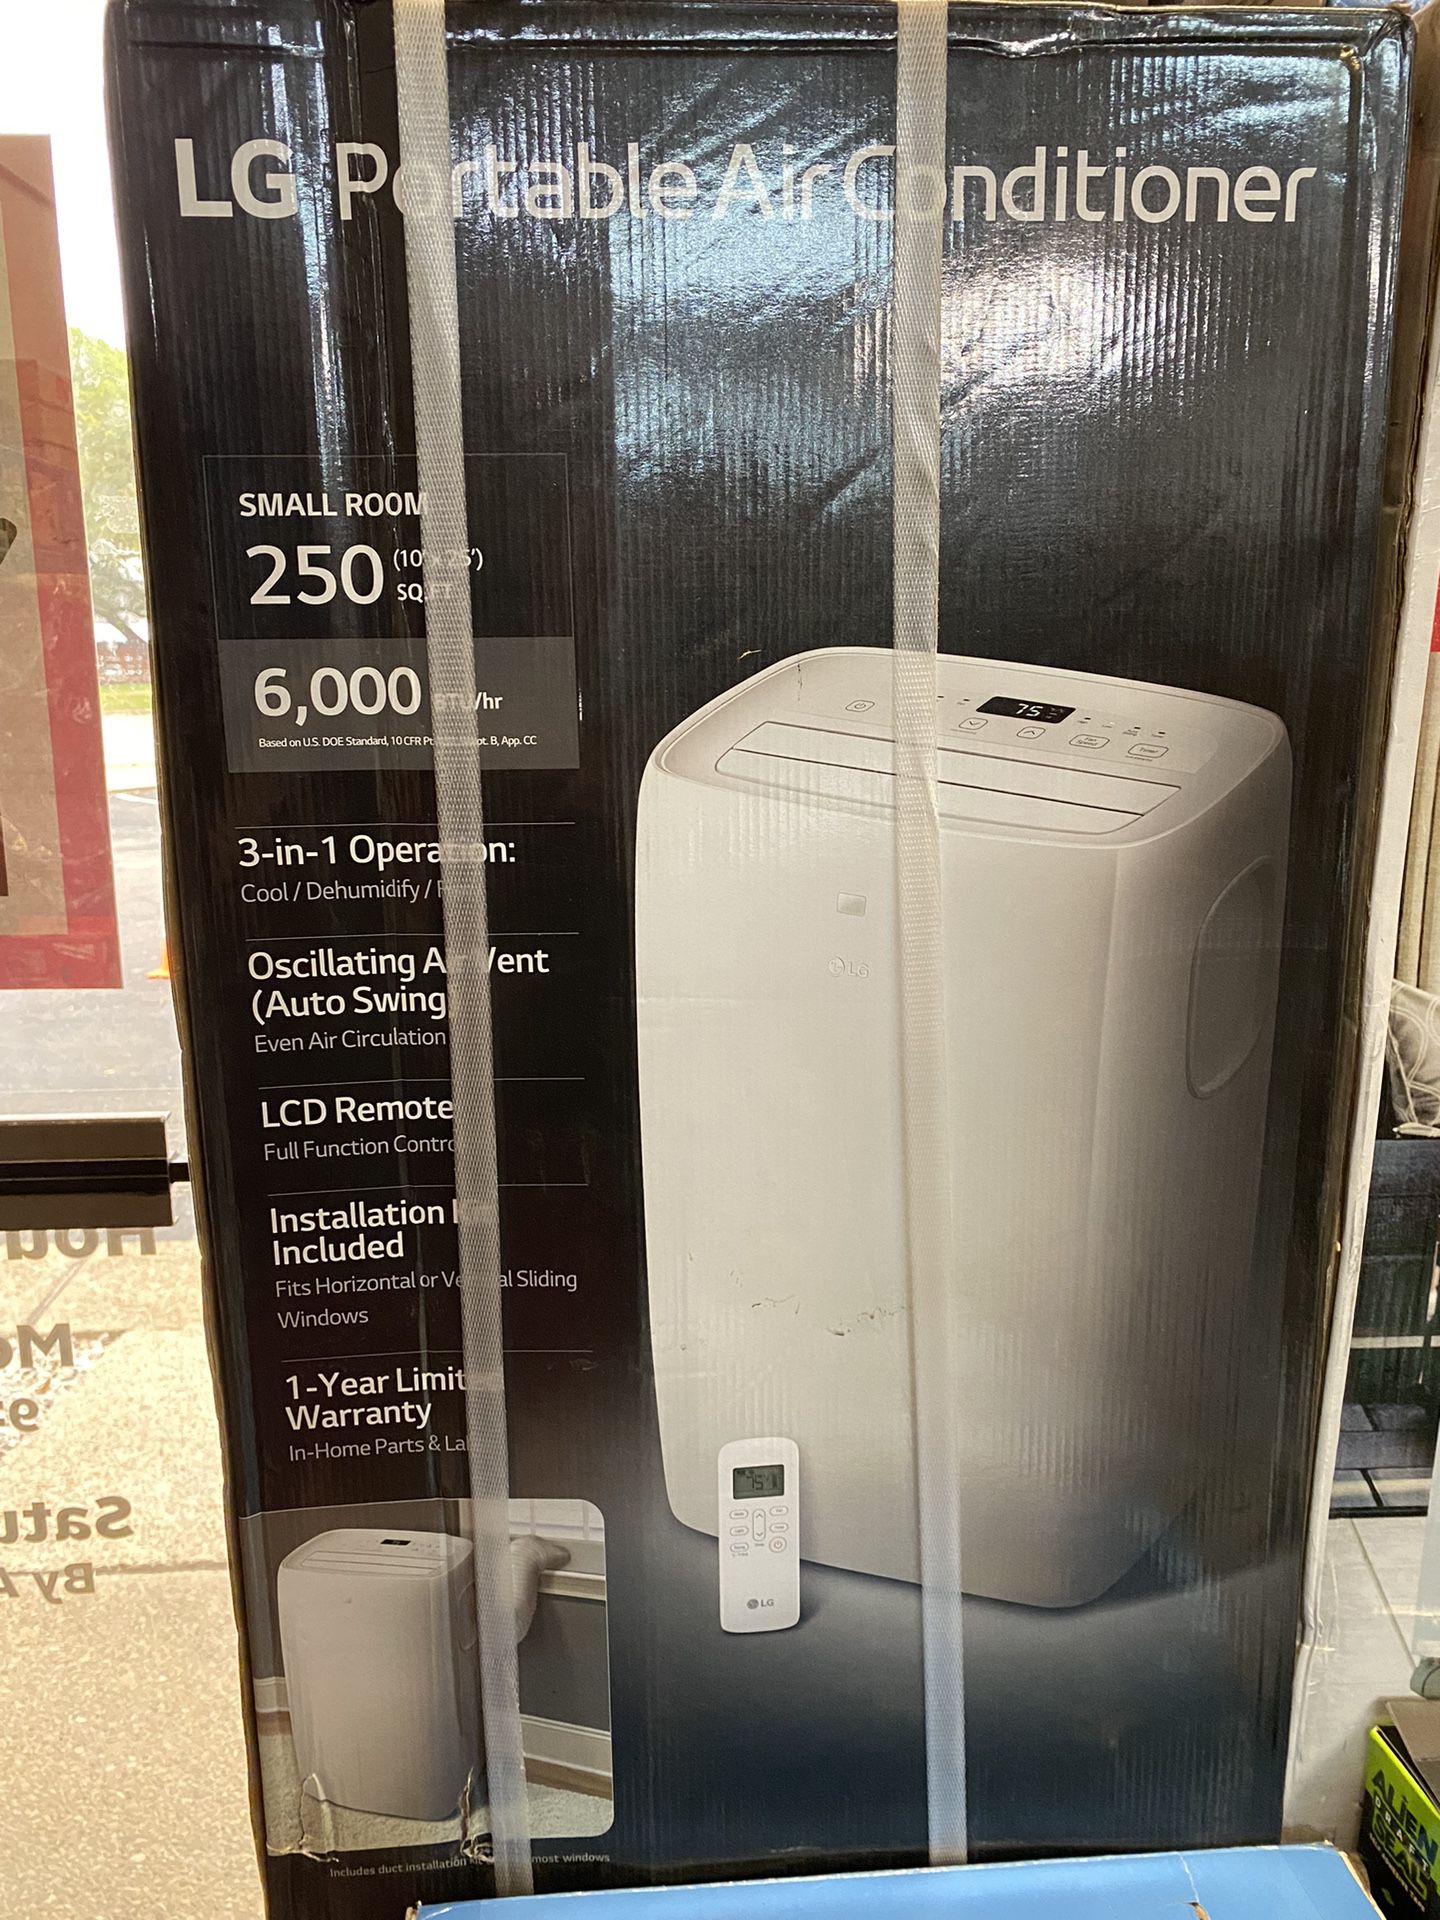 BRAND NEW LG 6,000 BTU Portable Air Conditioner Cools 250 Sq. Ft. with Dehumidifier in White